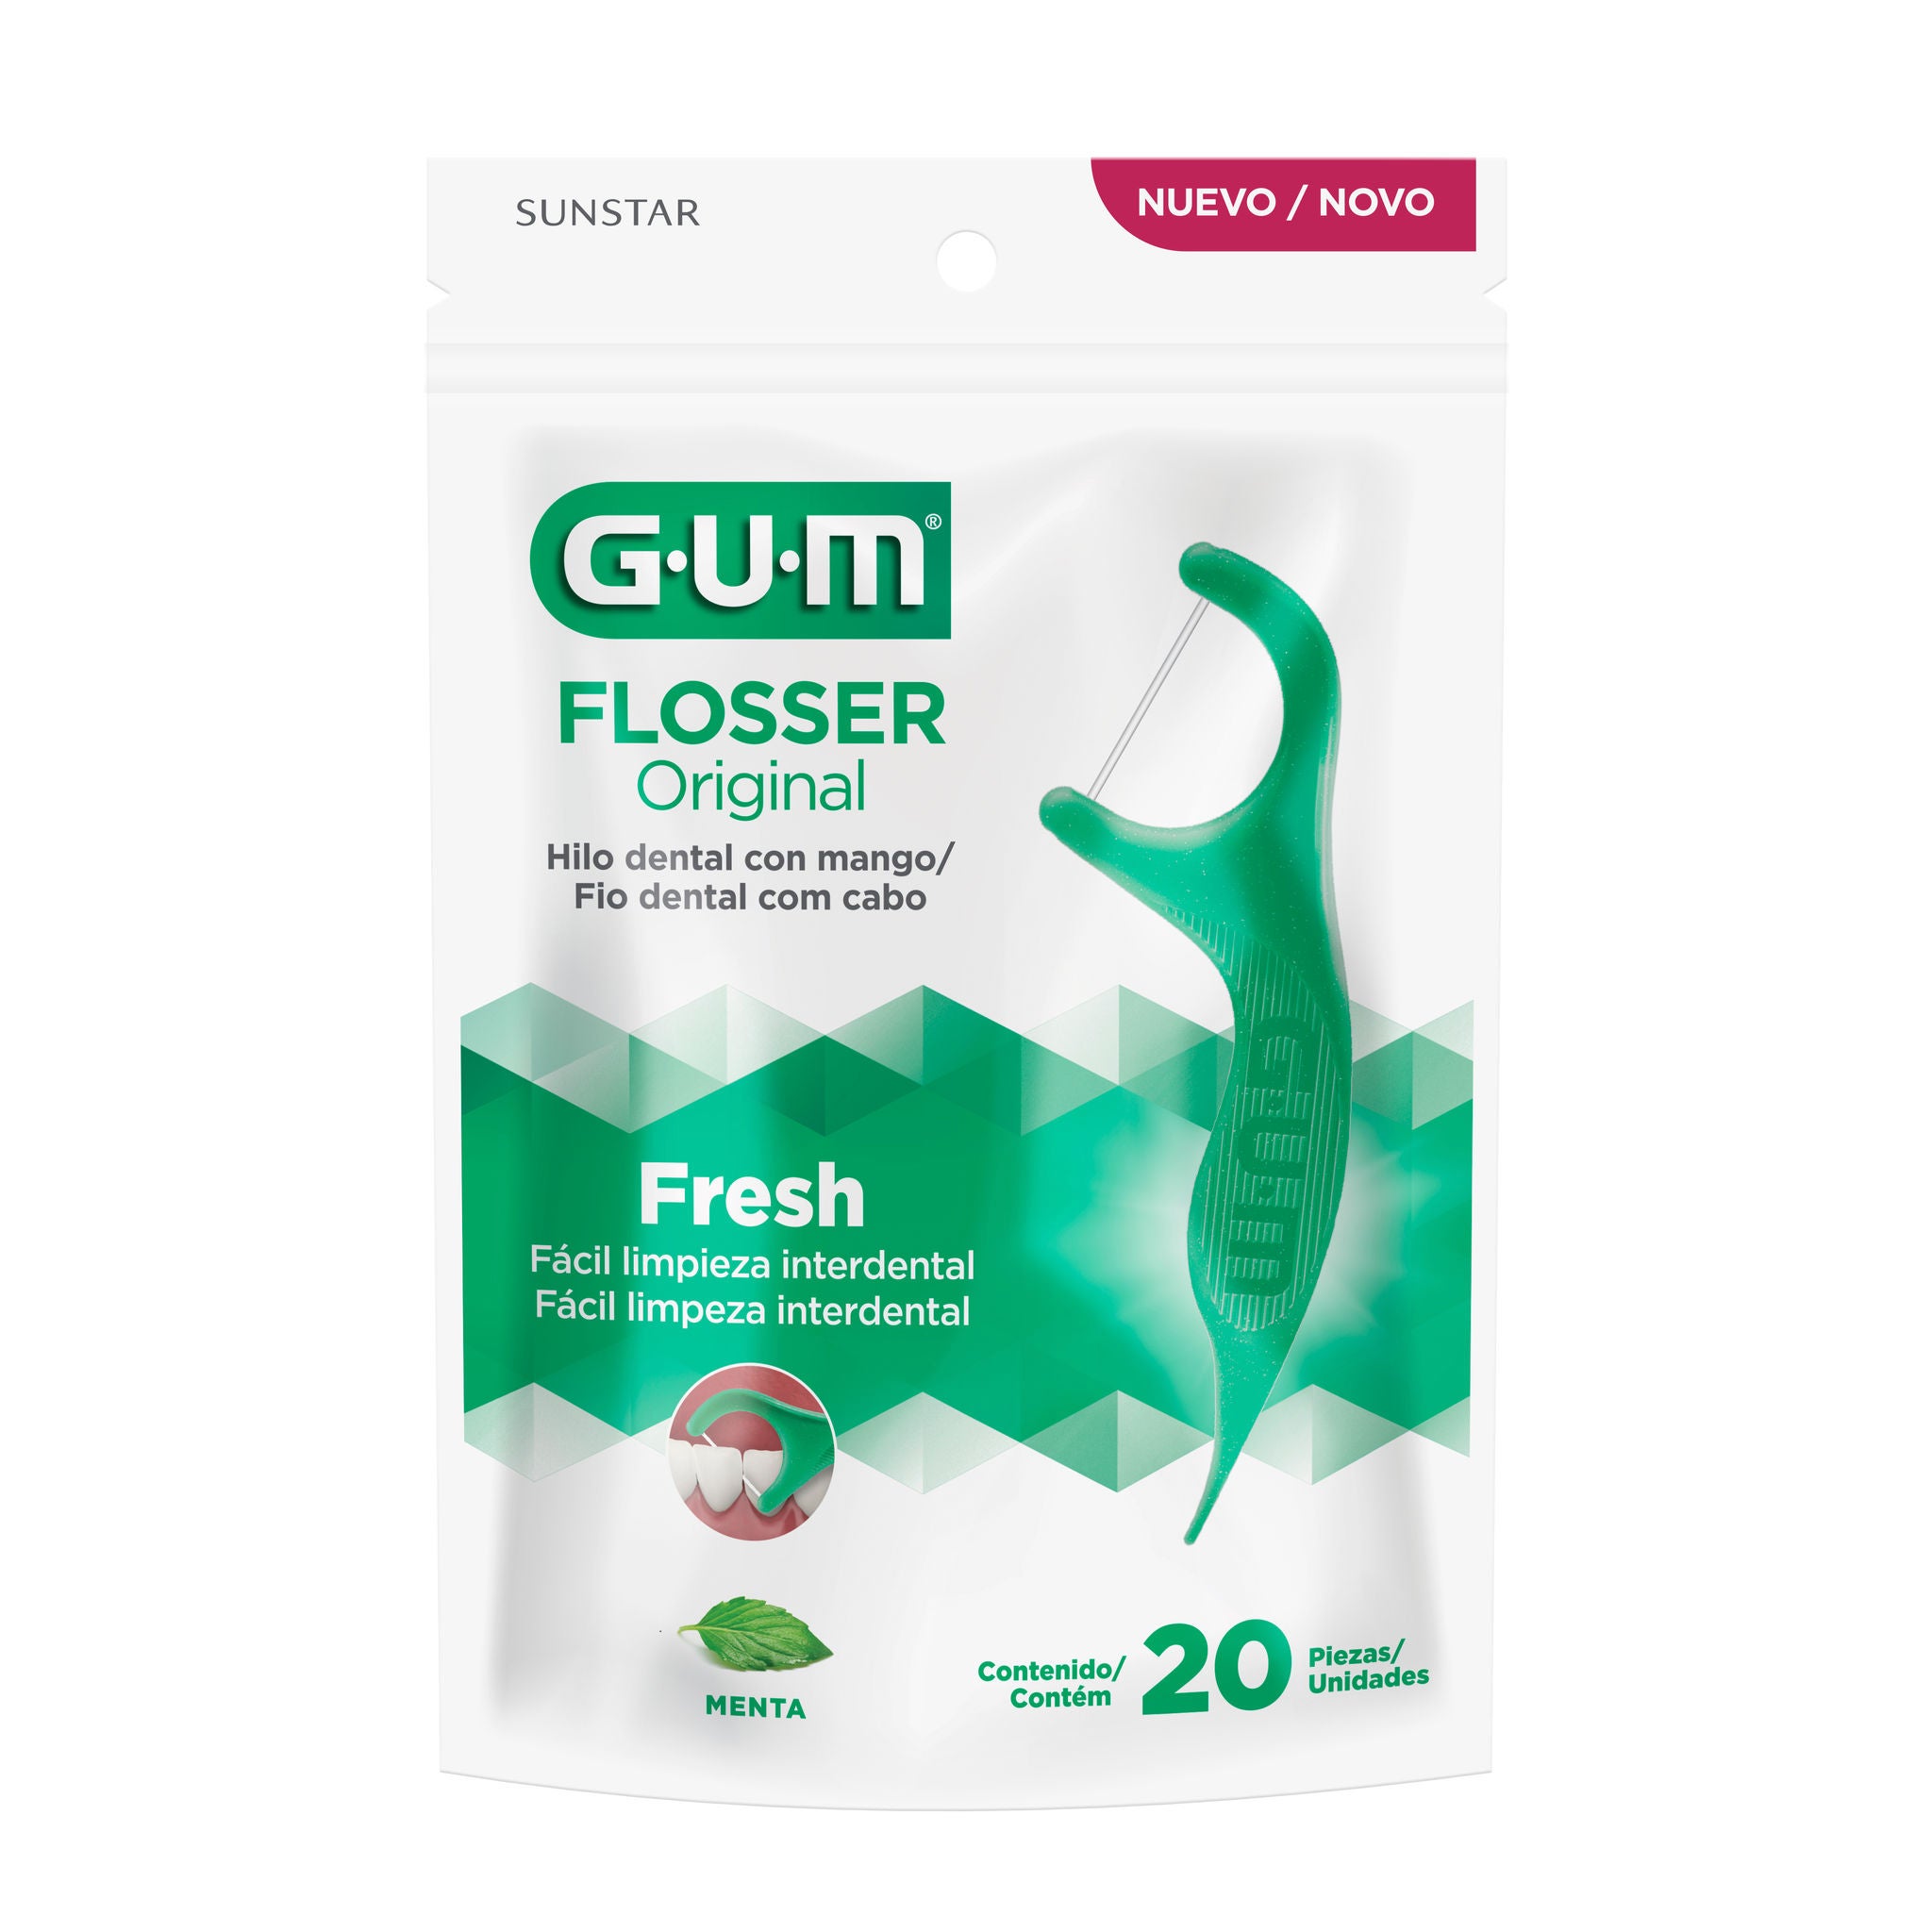 894LU2-Product-Packaging-Flossers-ProfessionalClean-front-20ct.jpg